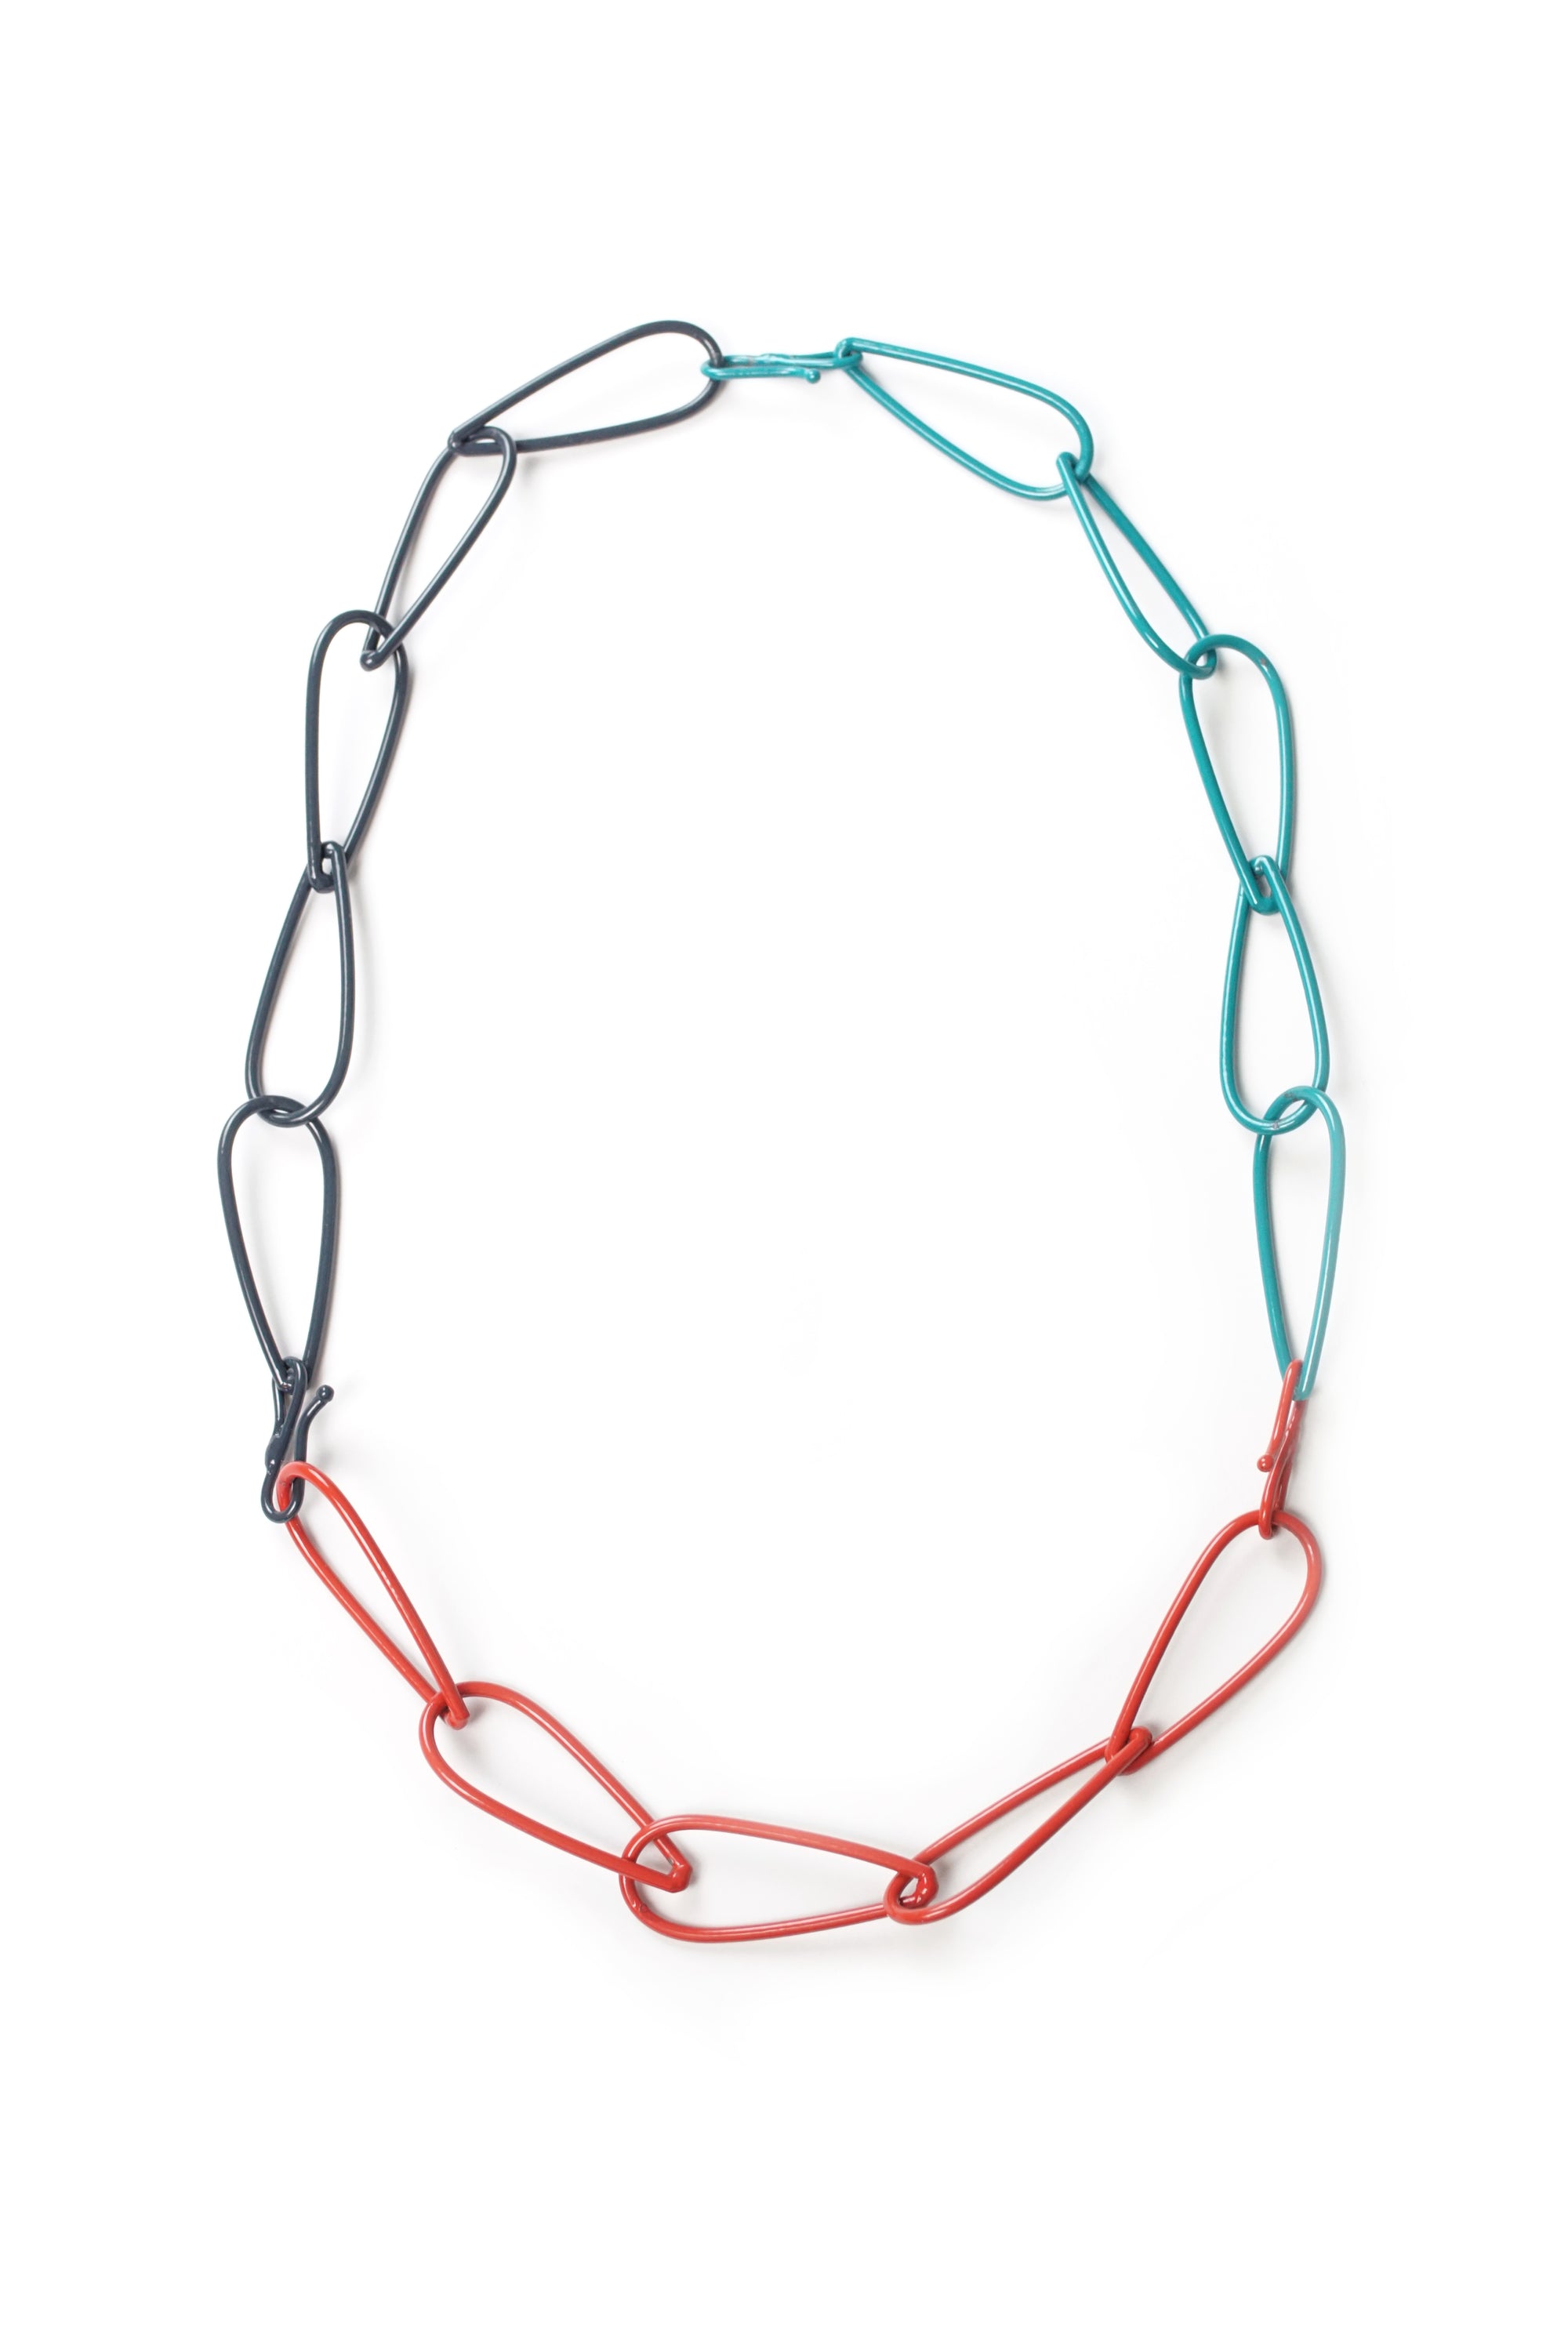 Modular Necklace in Midnight Grey, Coral Red, and Bold Teal